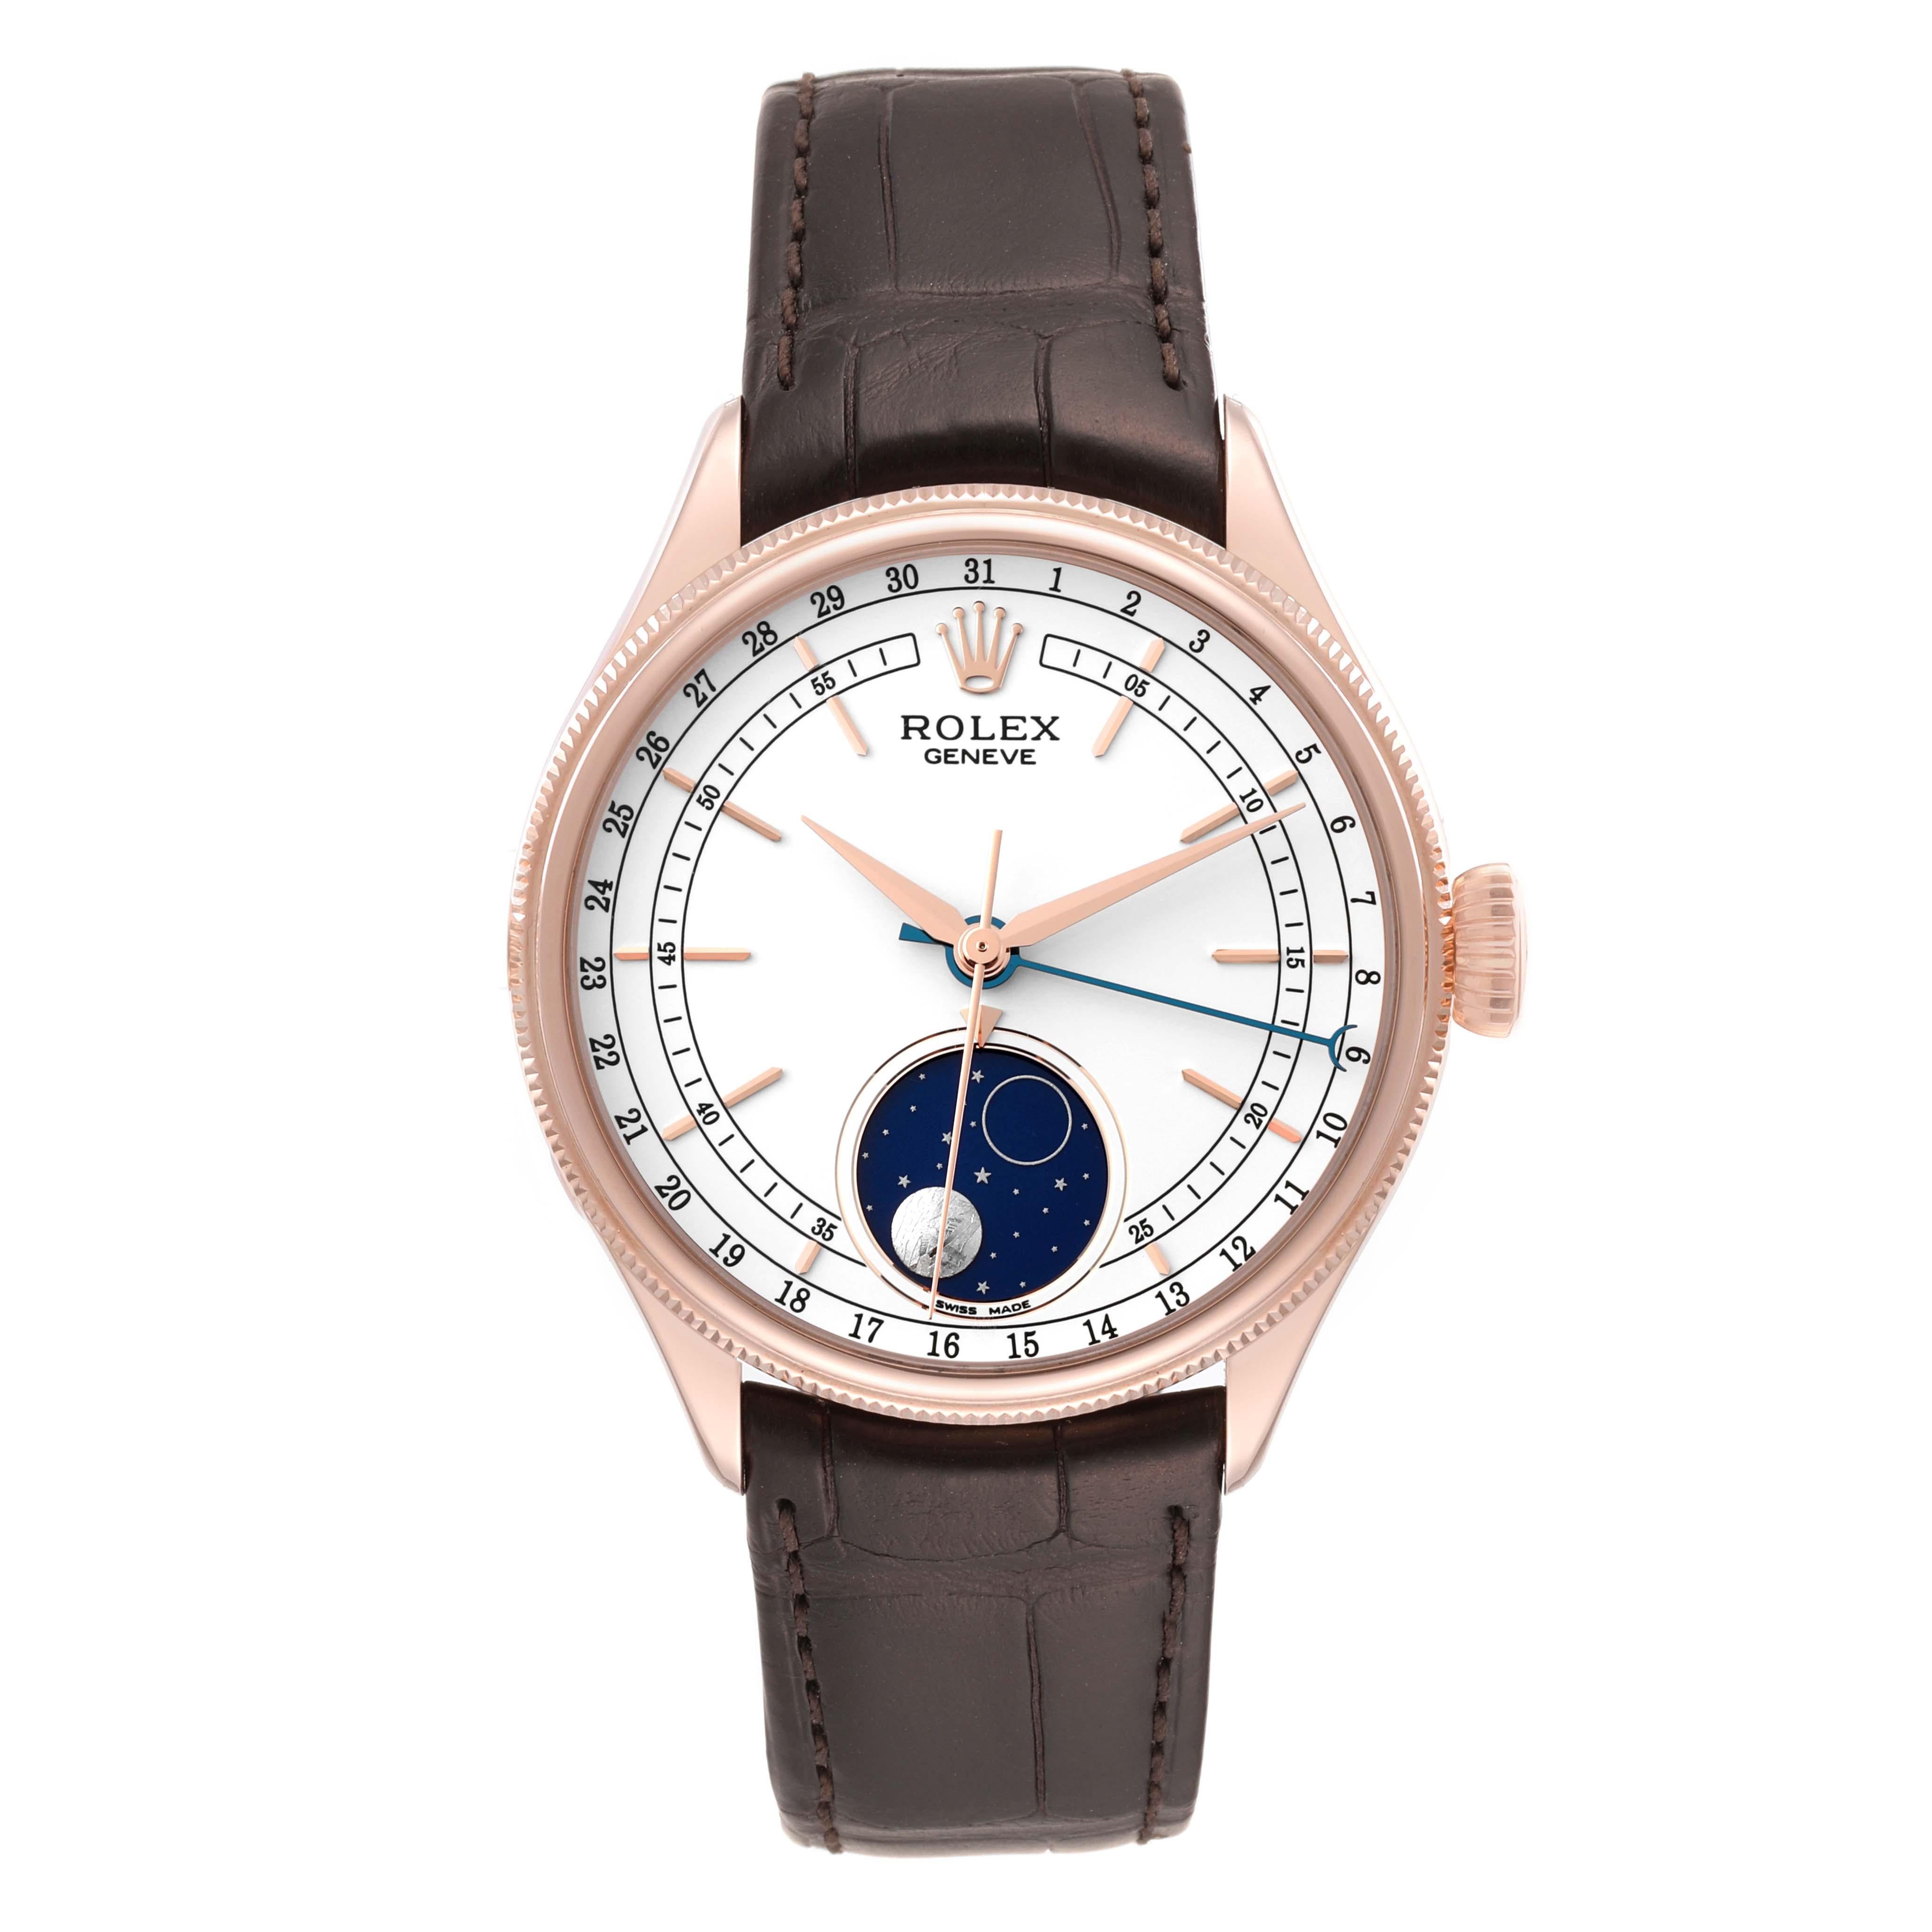 Rolex Cellini Moonphase White Dial Rose Gold Mens Watch 50535 Box Card. Automatic self-winding movement. Officially certified Swiss chronometer (COSC). Paramagnetic blue Parachrom hairspring. Bidirectional self-winding via Perpetual rotor. 18K